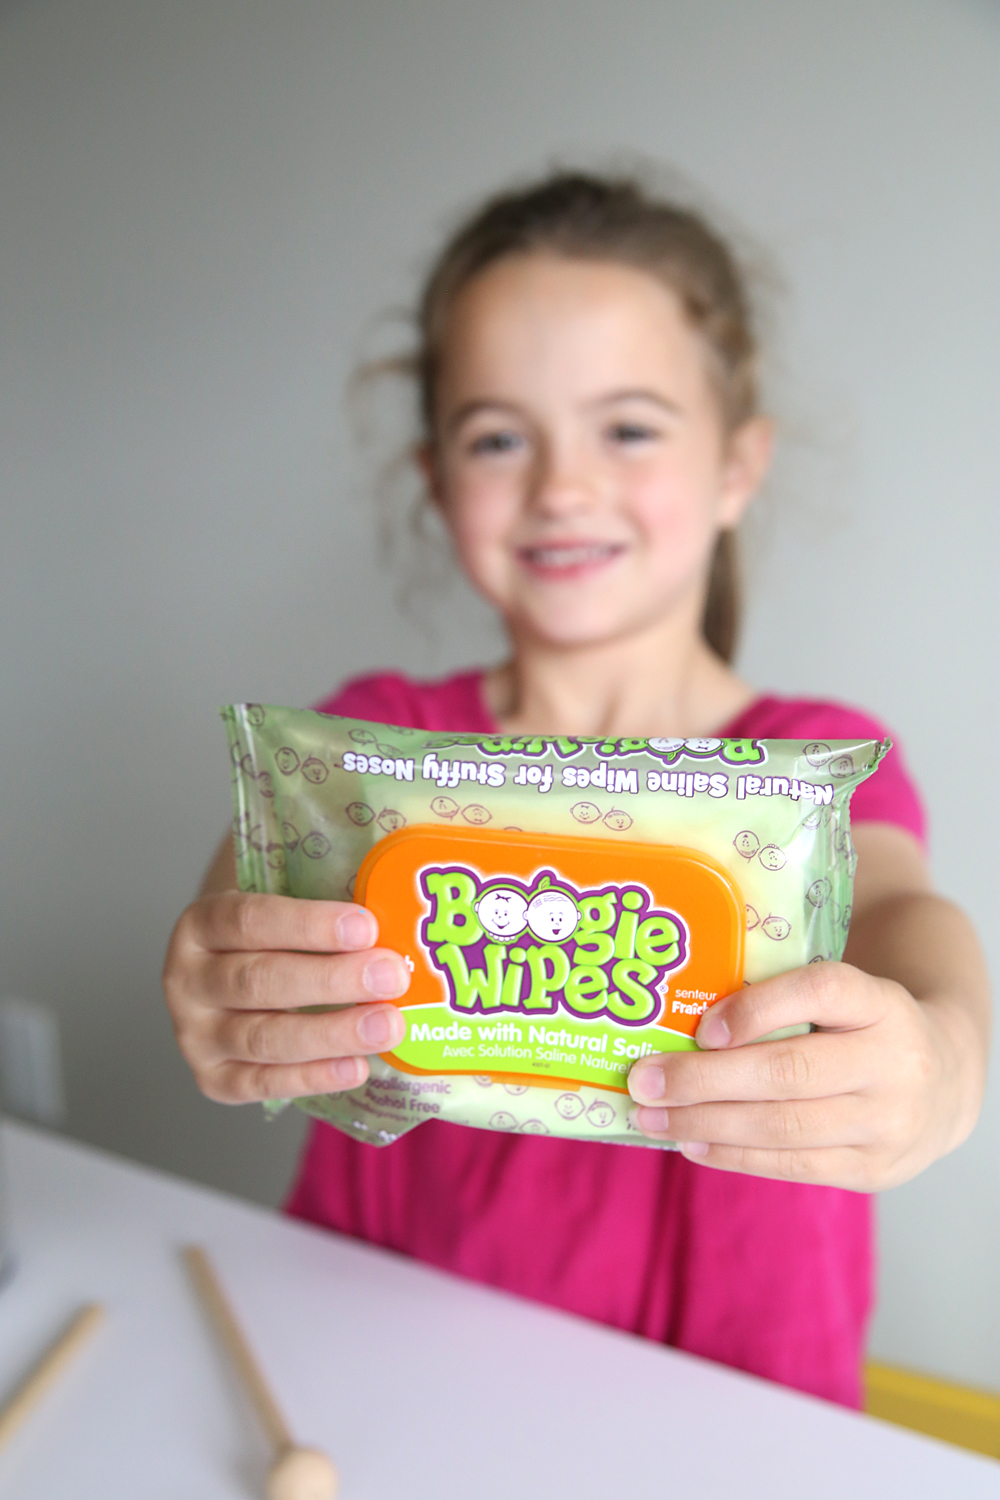 A girl holding package of boogie wipes